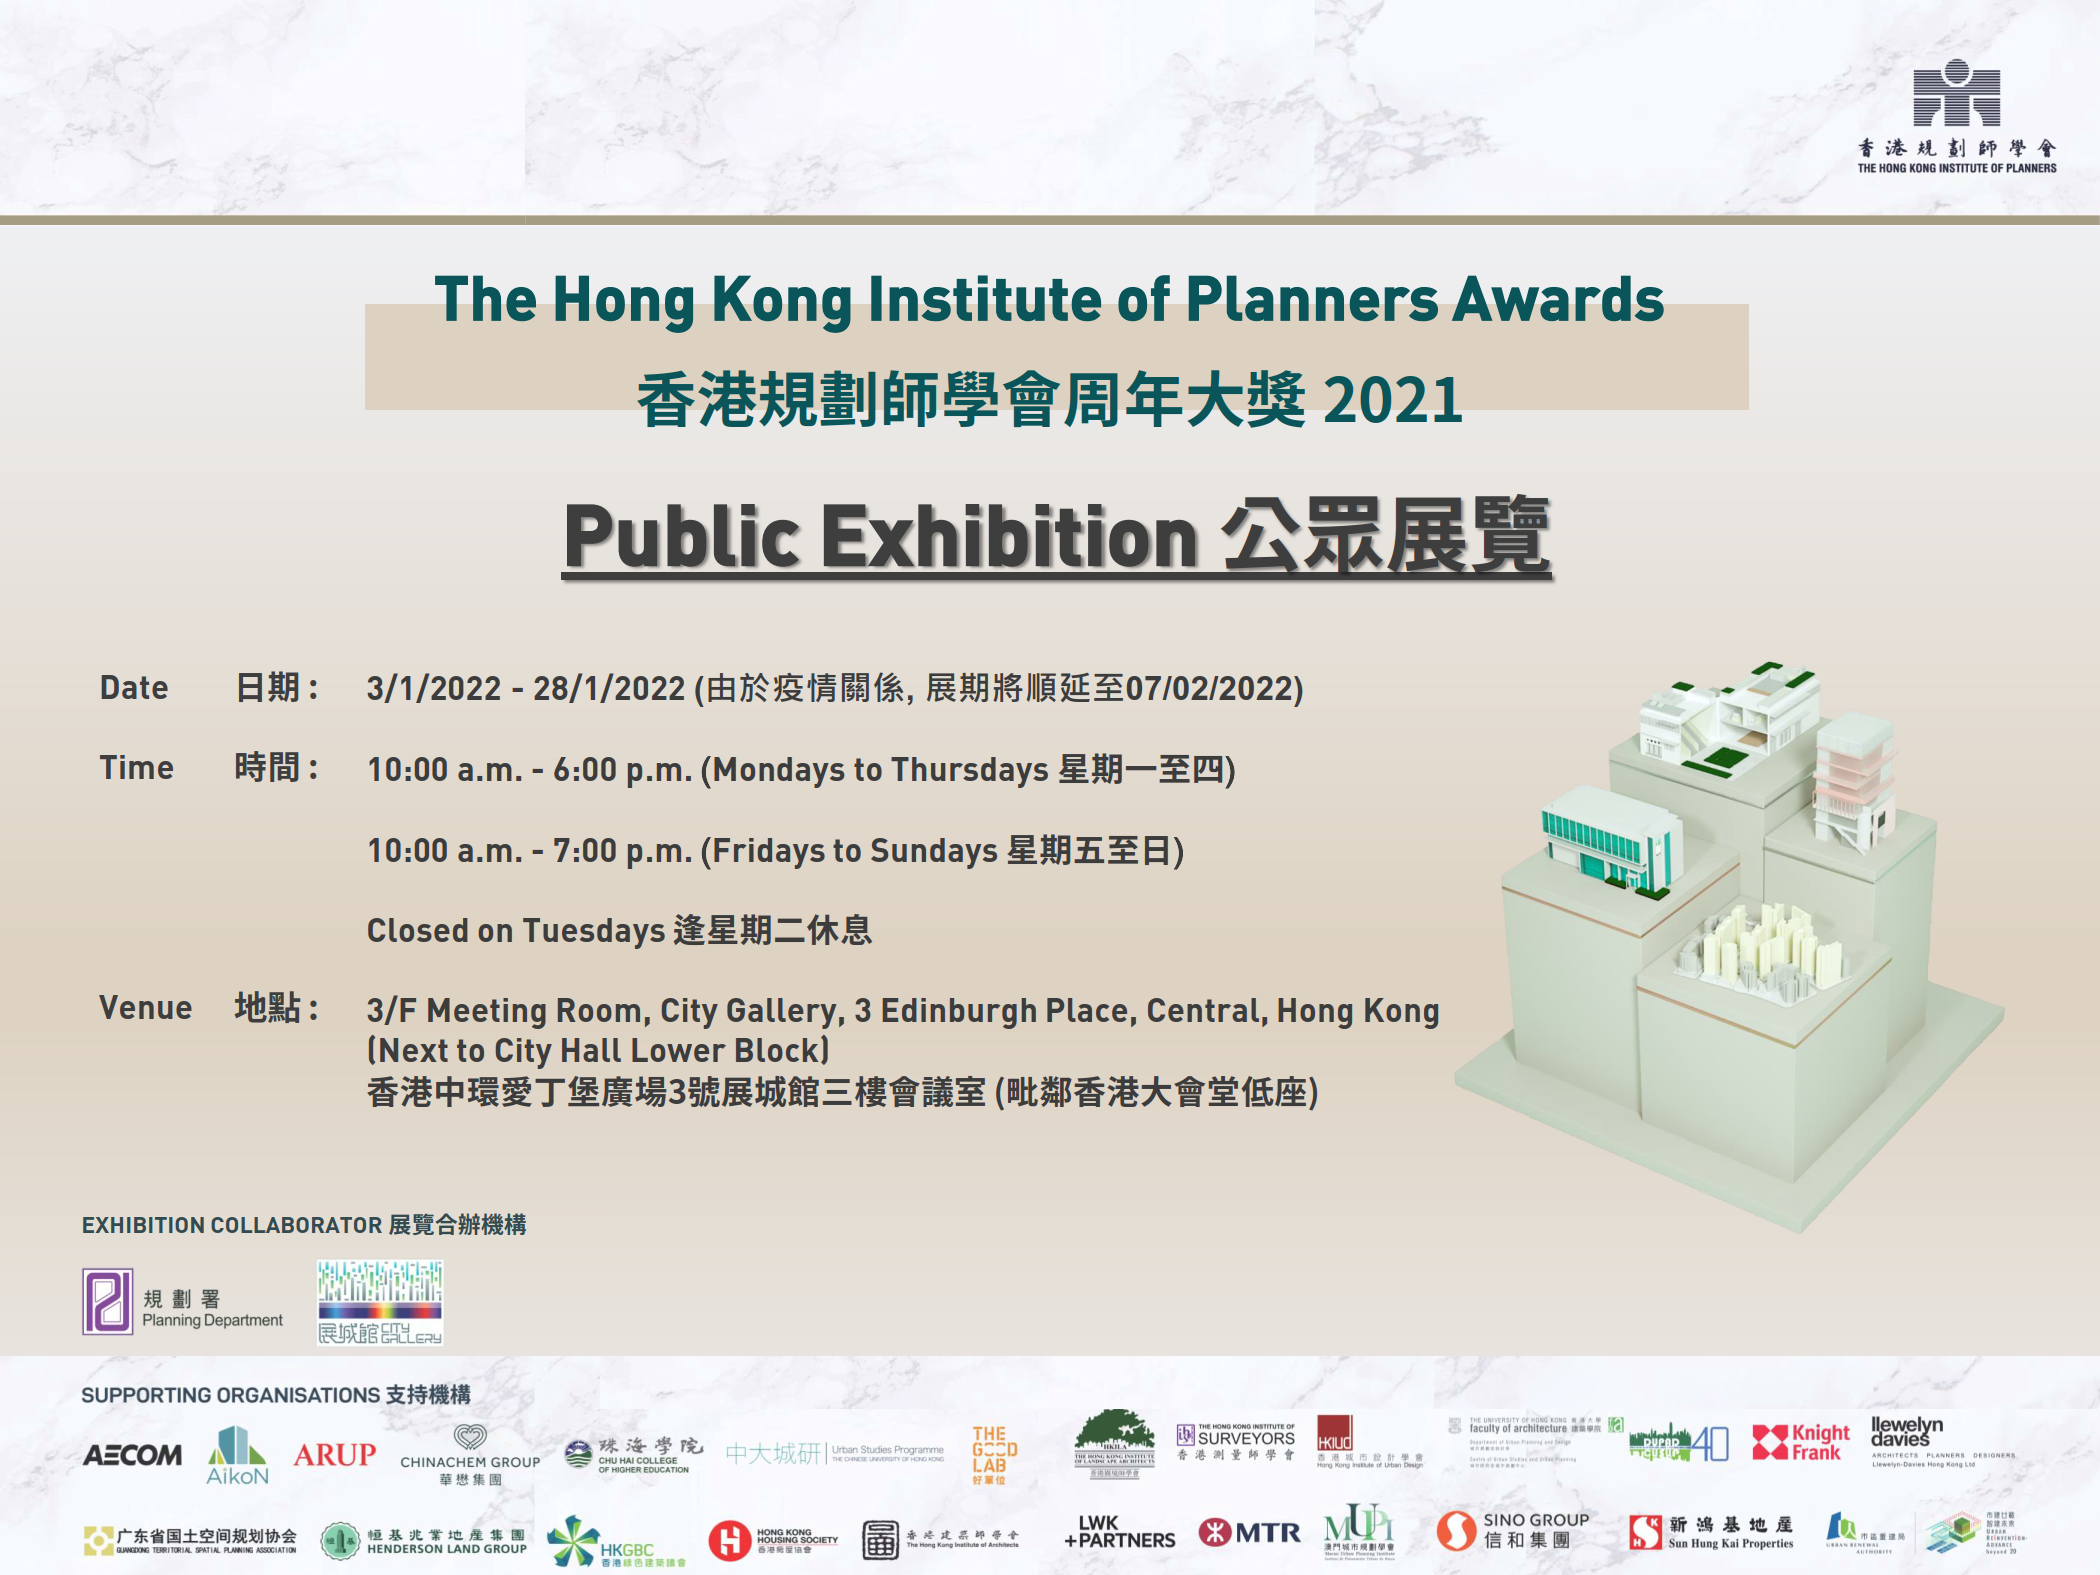 The Hong Kong Institute of Planners Awards 2021 Public Exhibition